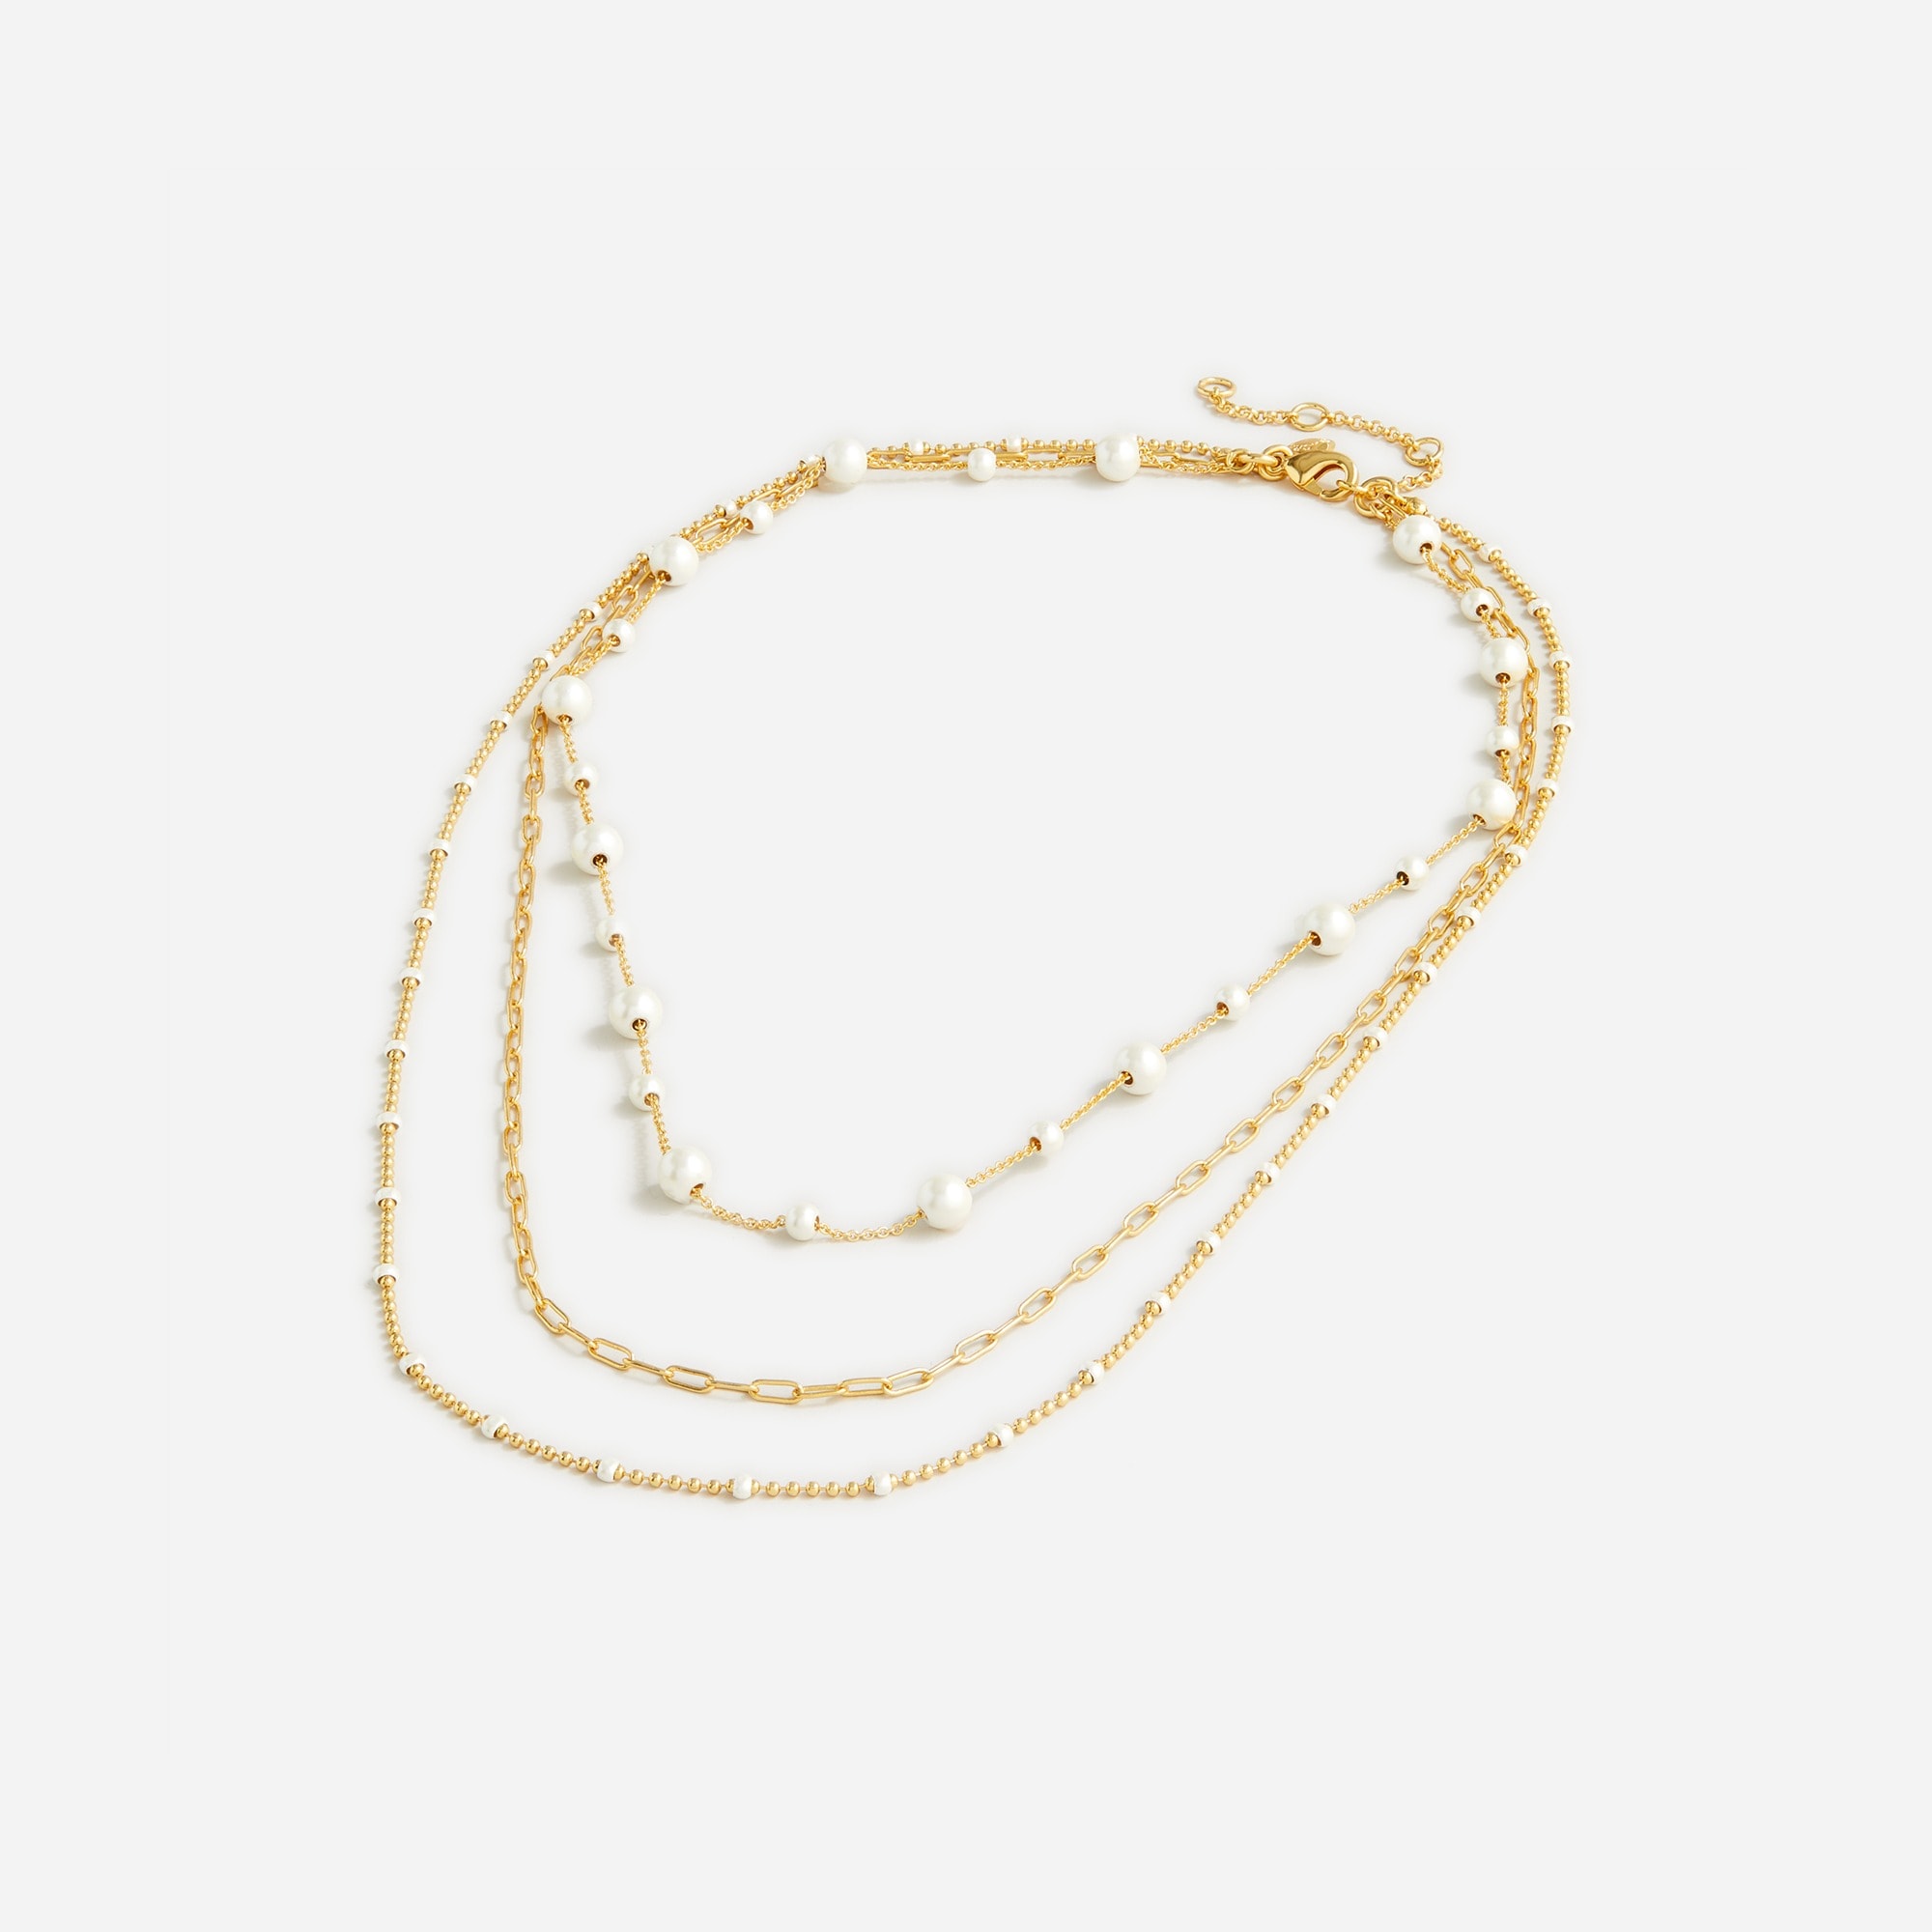  Dainty gold-plated layered necklace